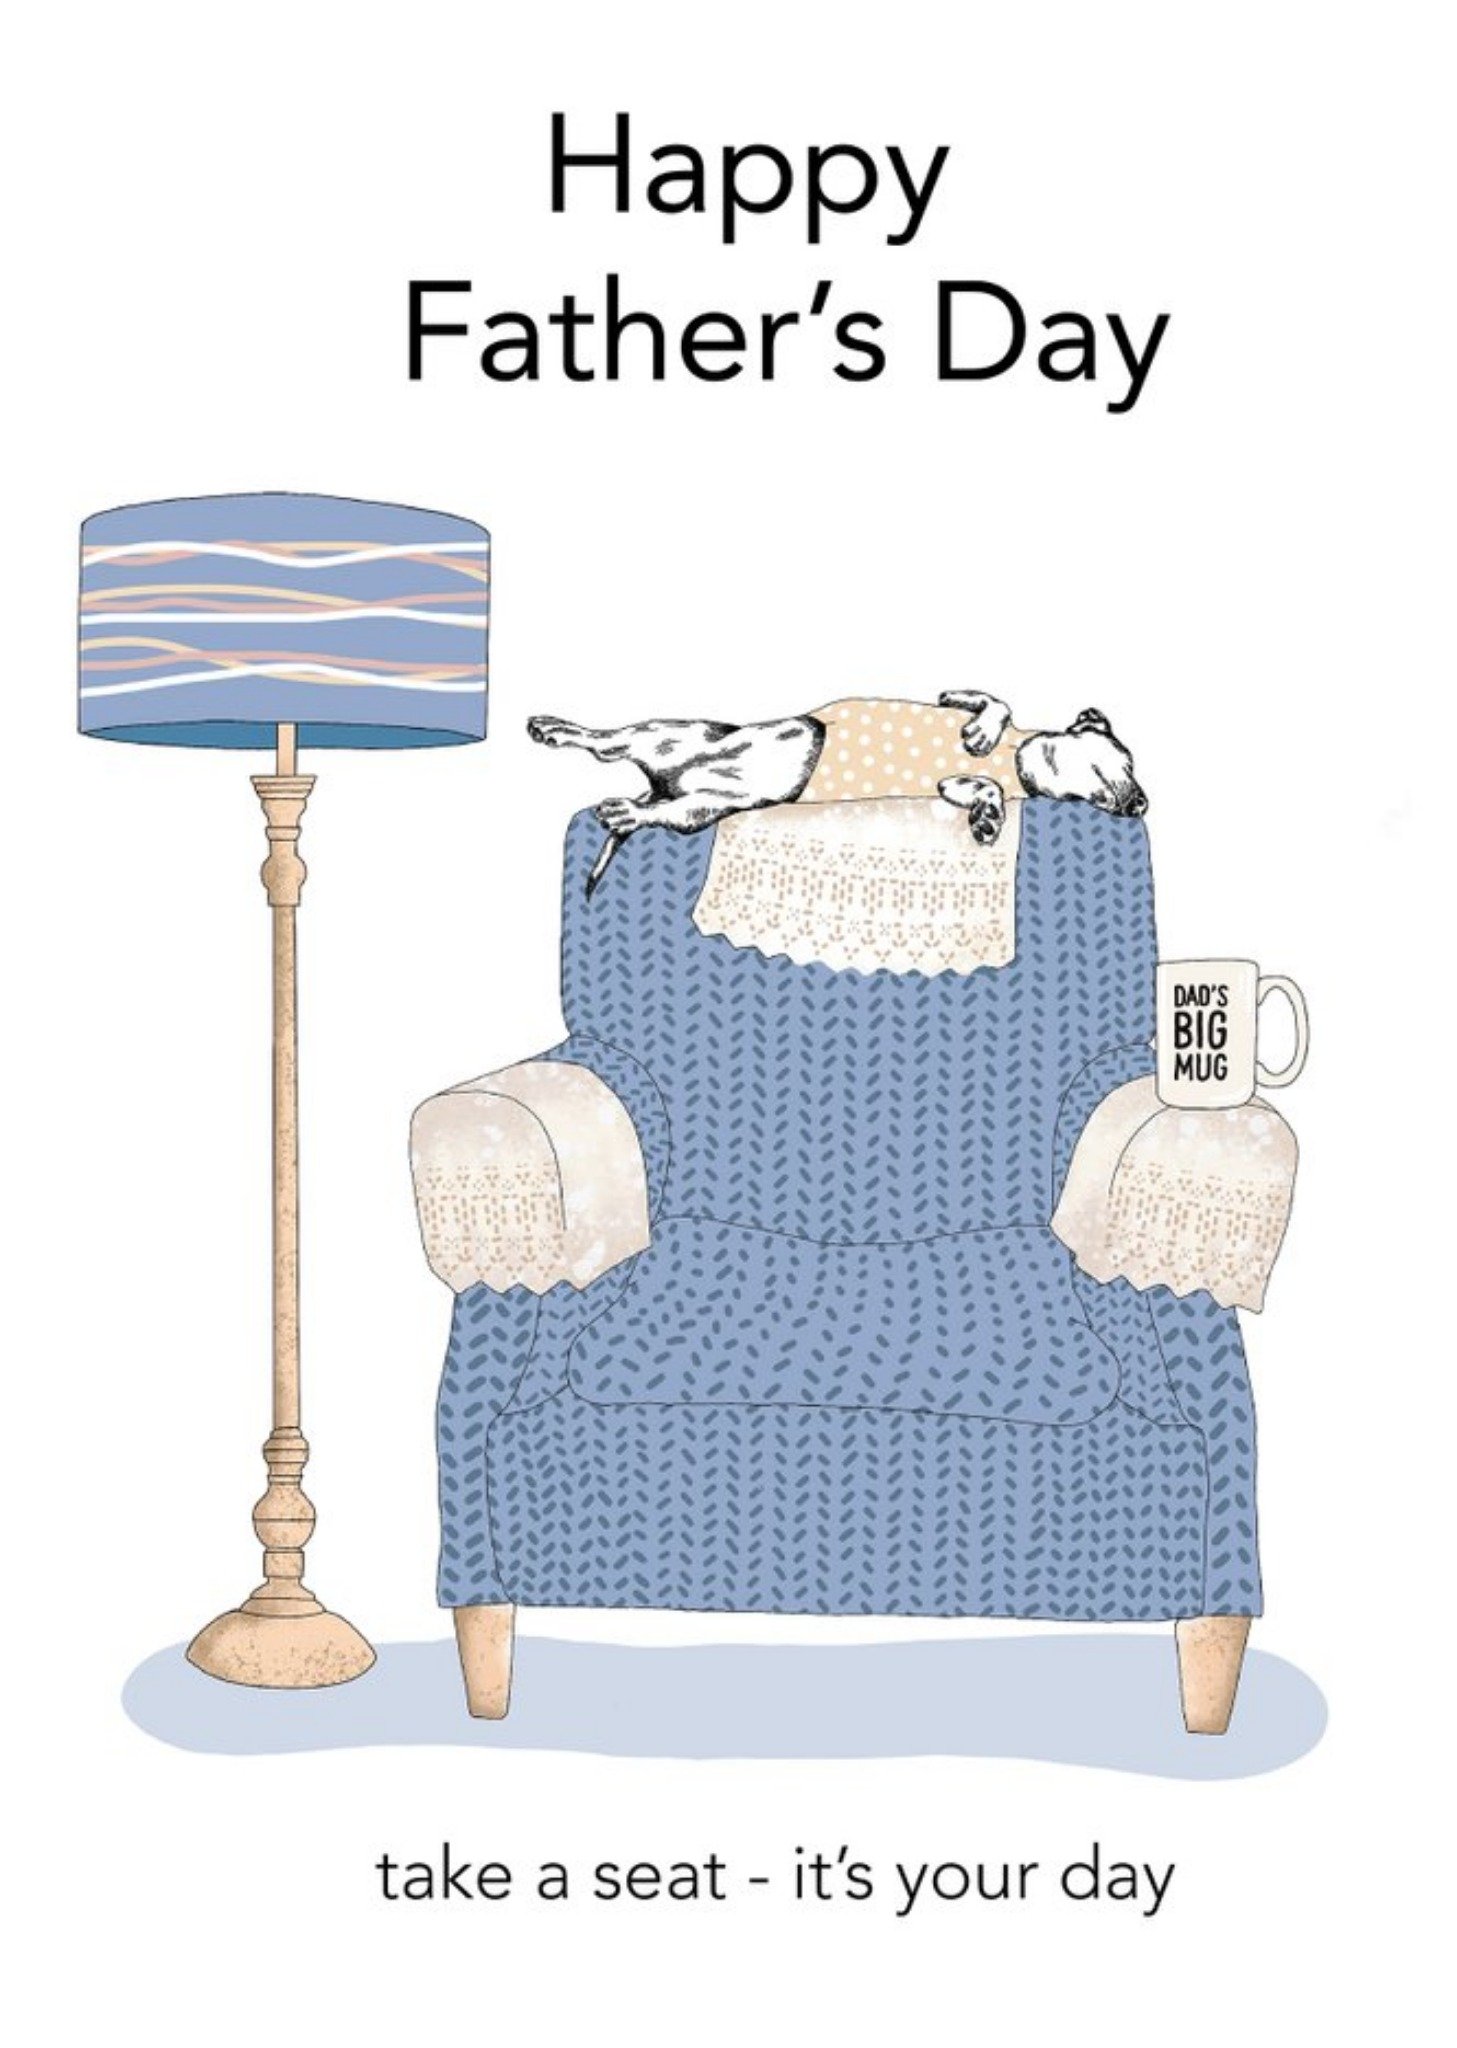 Moonpig Illustration Of A Dog Resting On An Armchair Father's Day Card Ecard